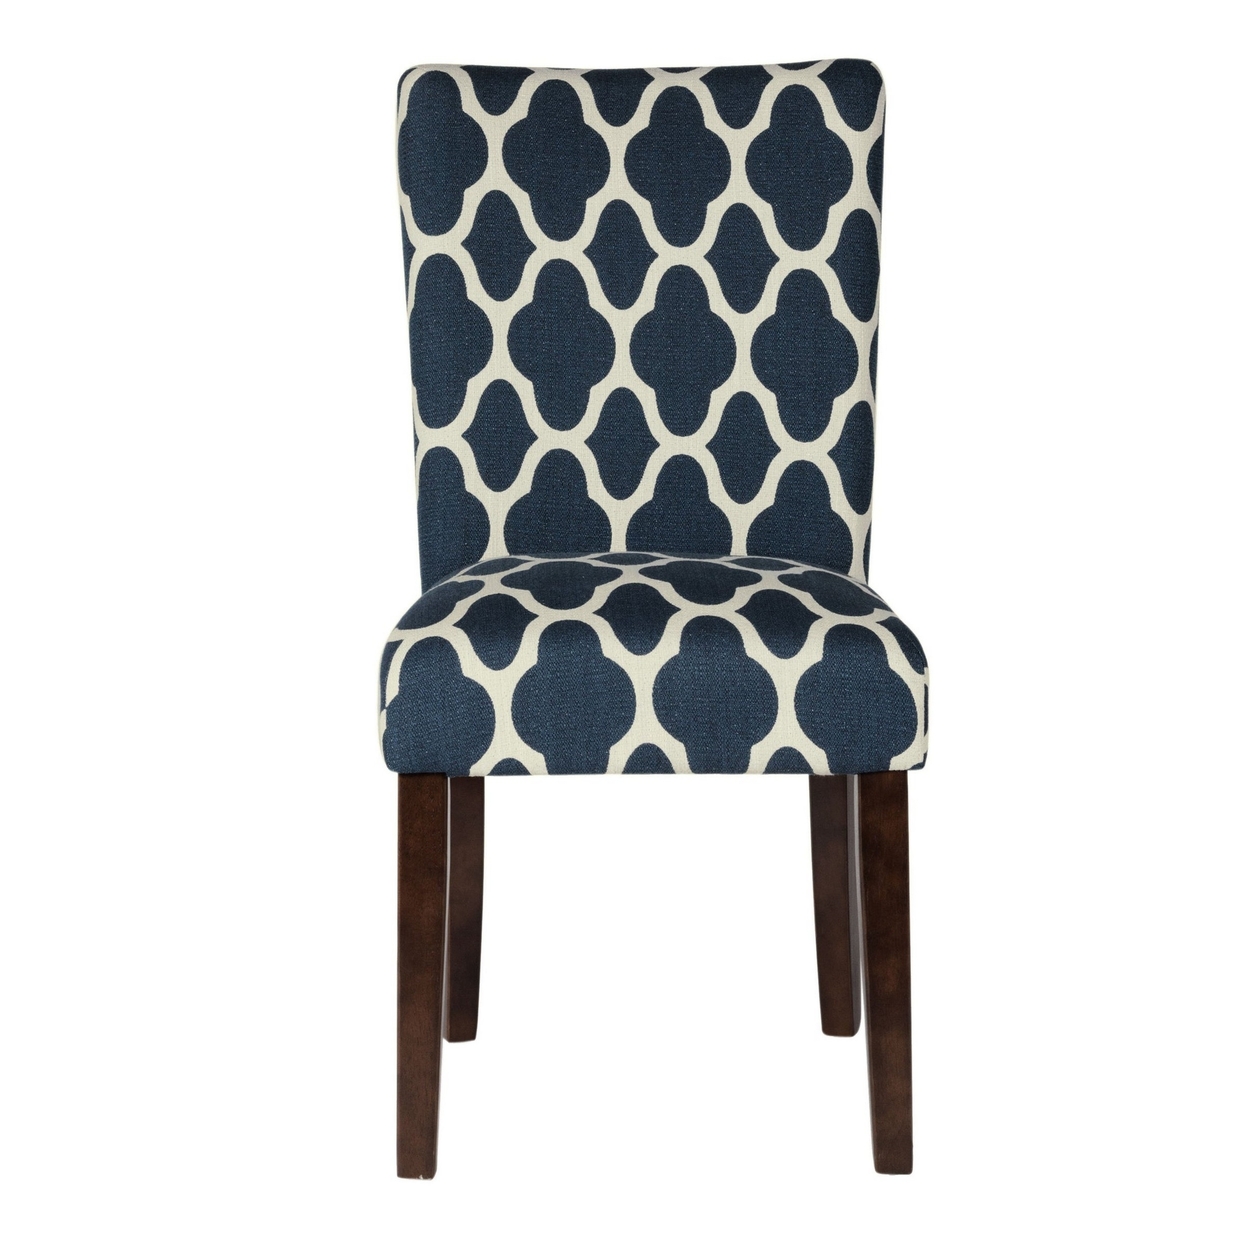 Wooden Parson Dining Chairs With Quatrefoil Patterned Fabric Upholstery, Blue And White, Set Of Two-Saltoro Sherpi